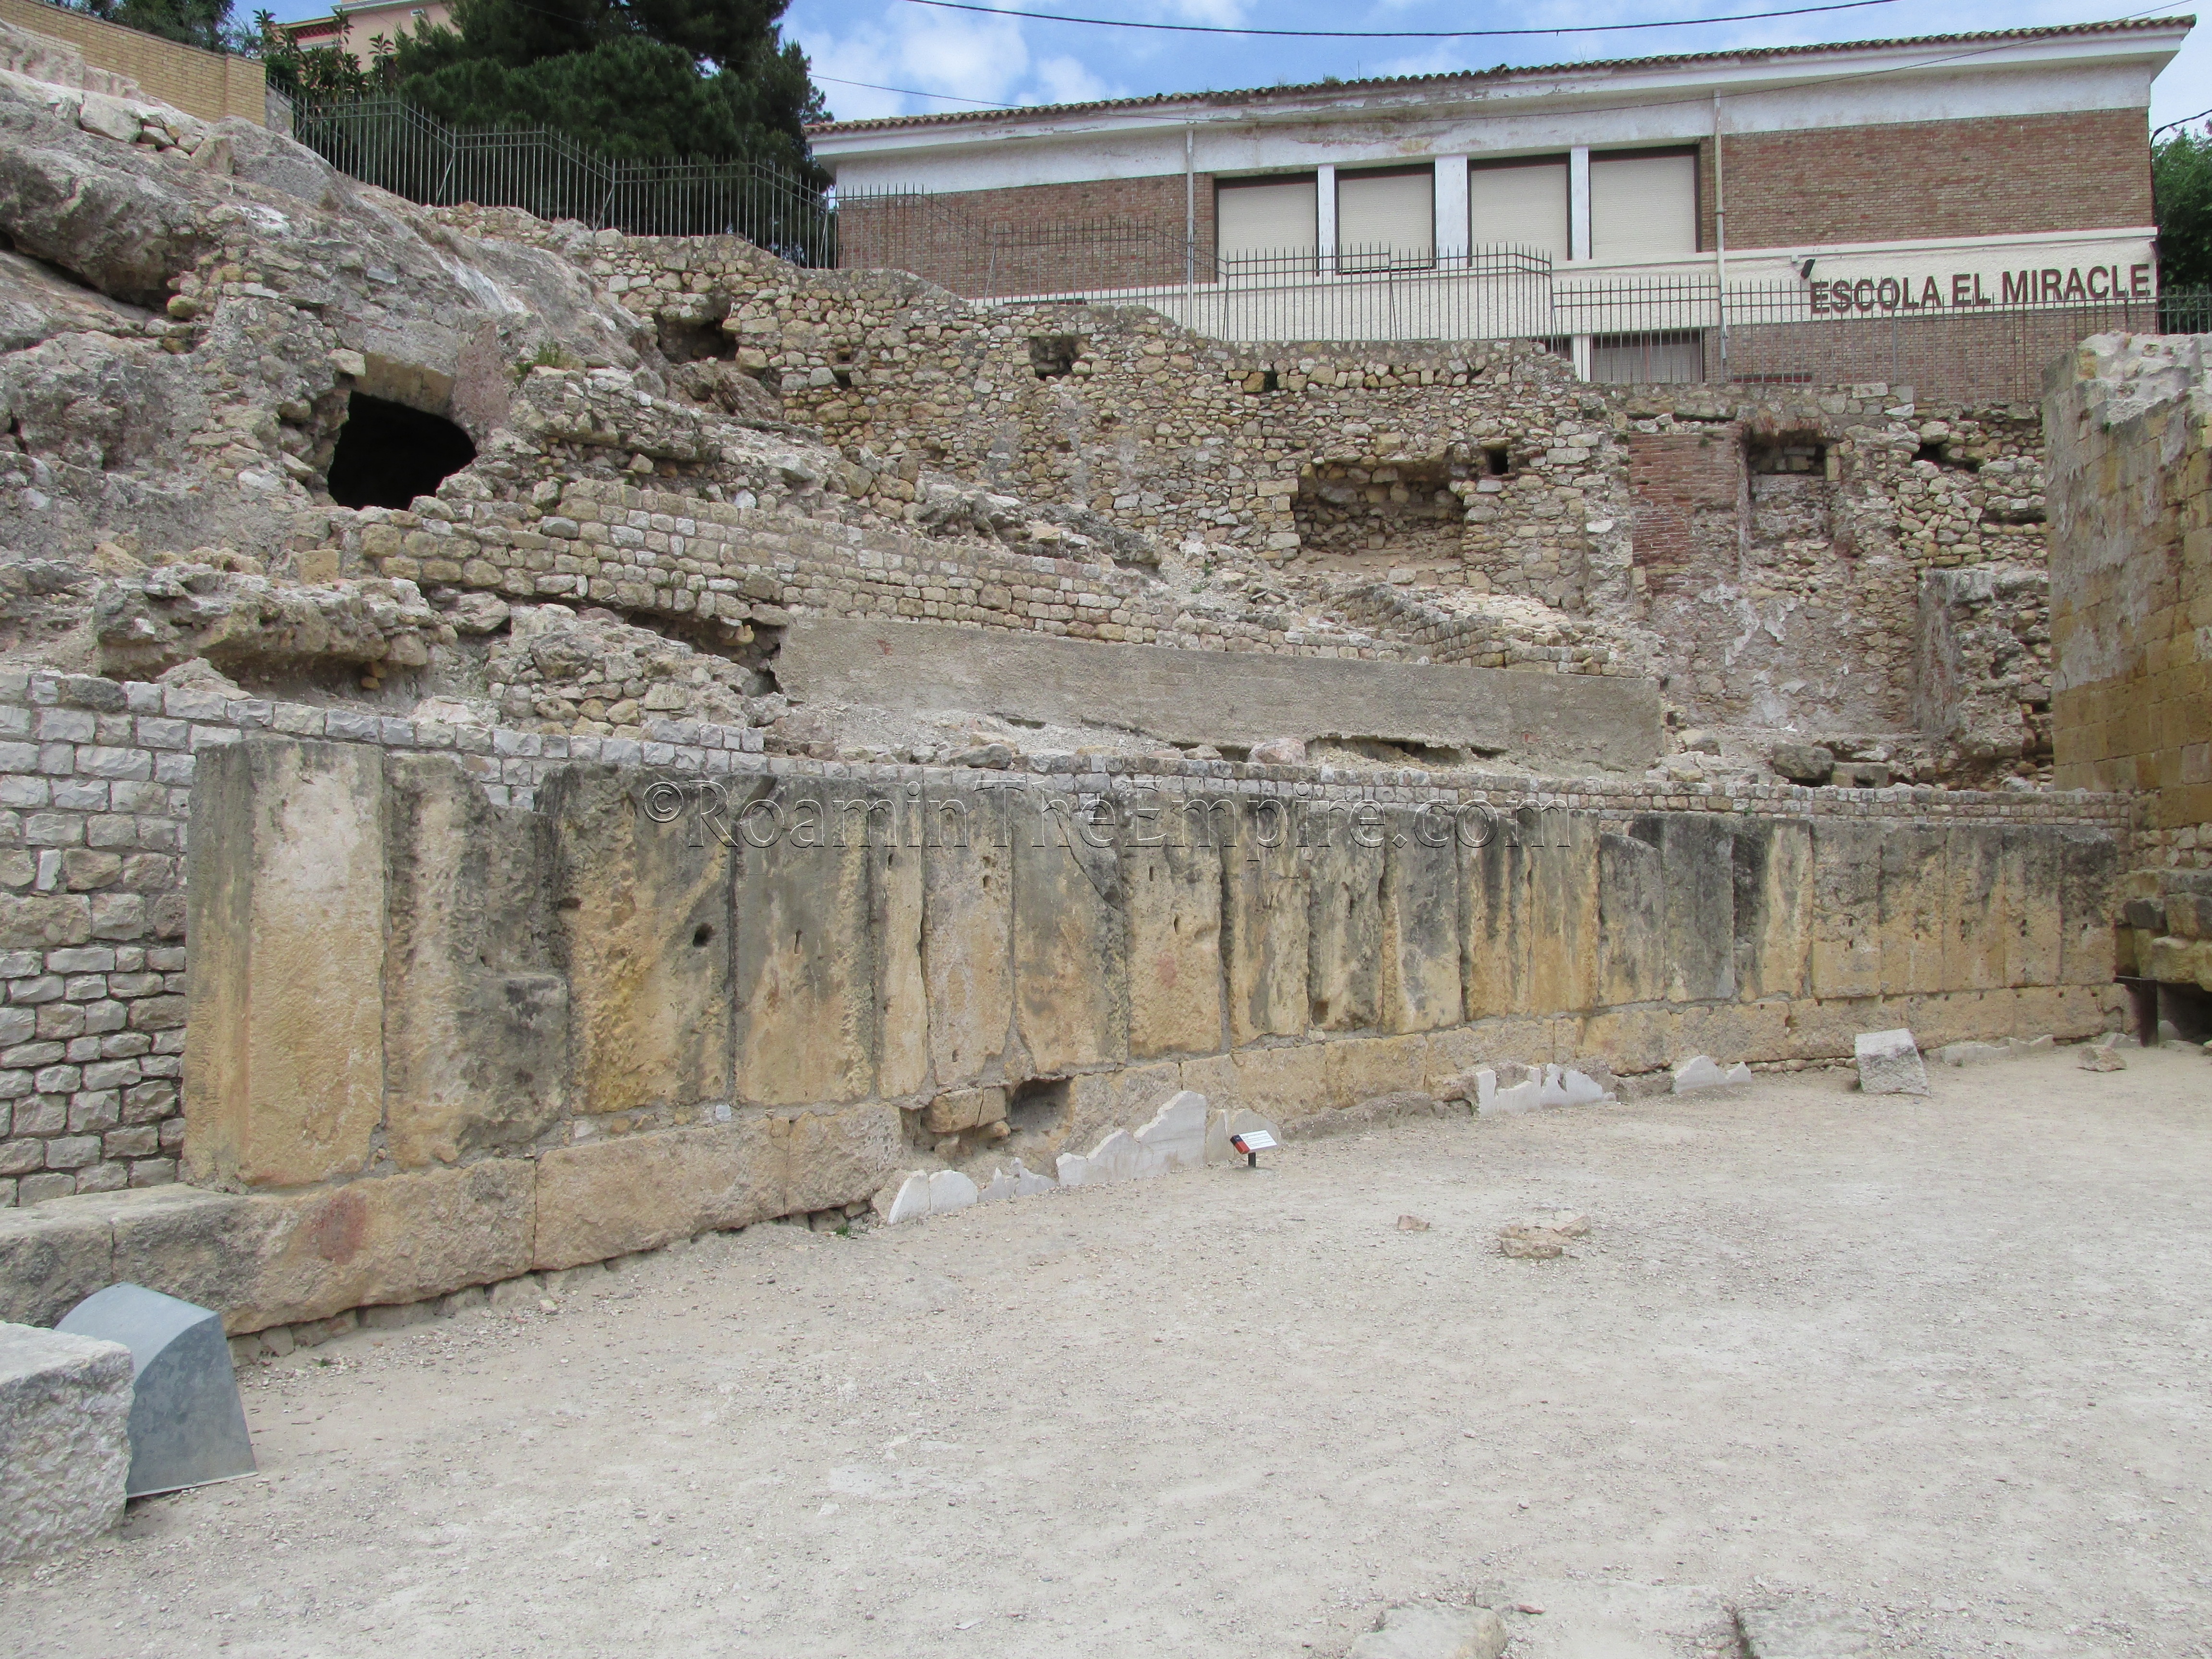 Podium and arena of the amphitheater.